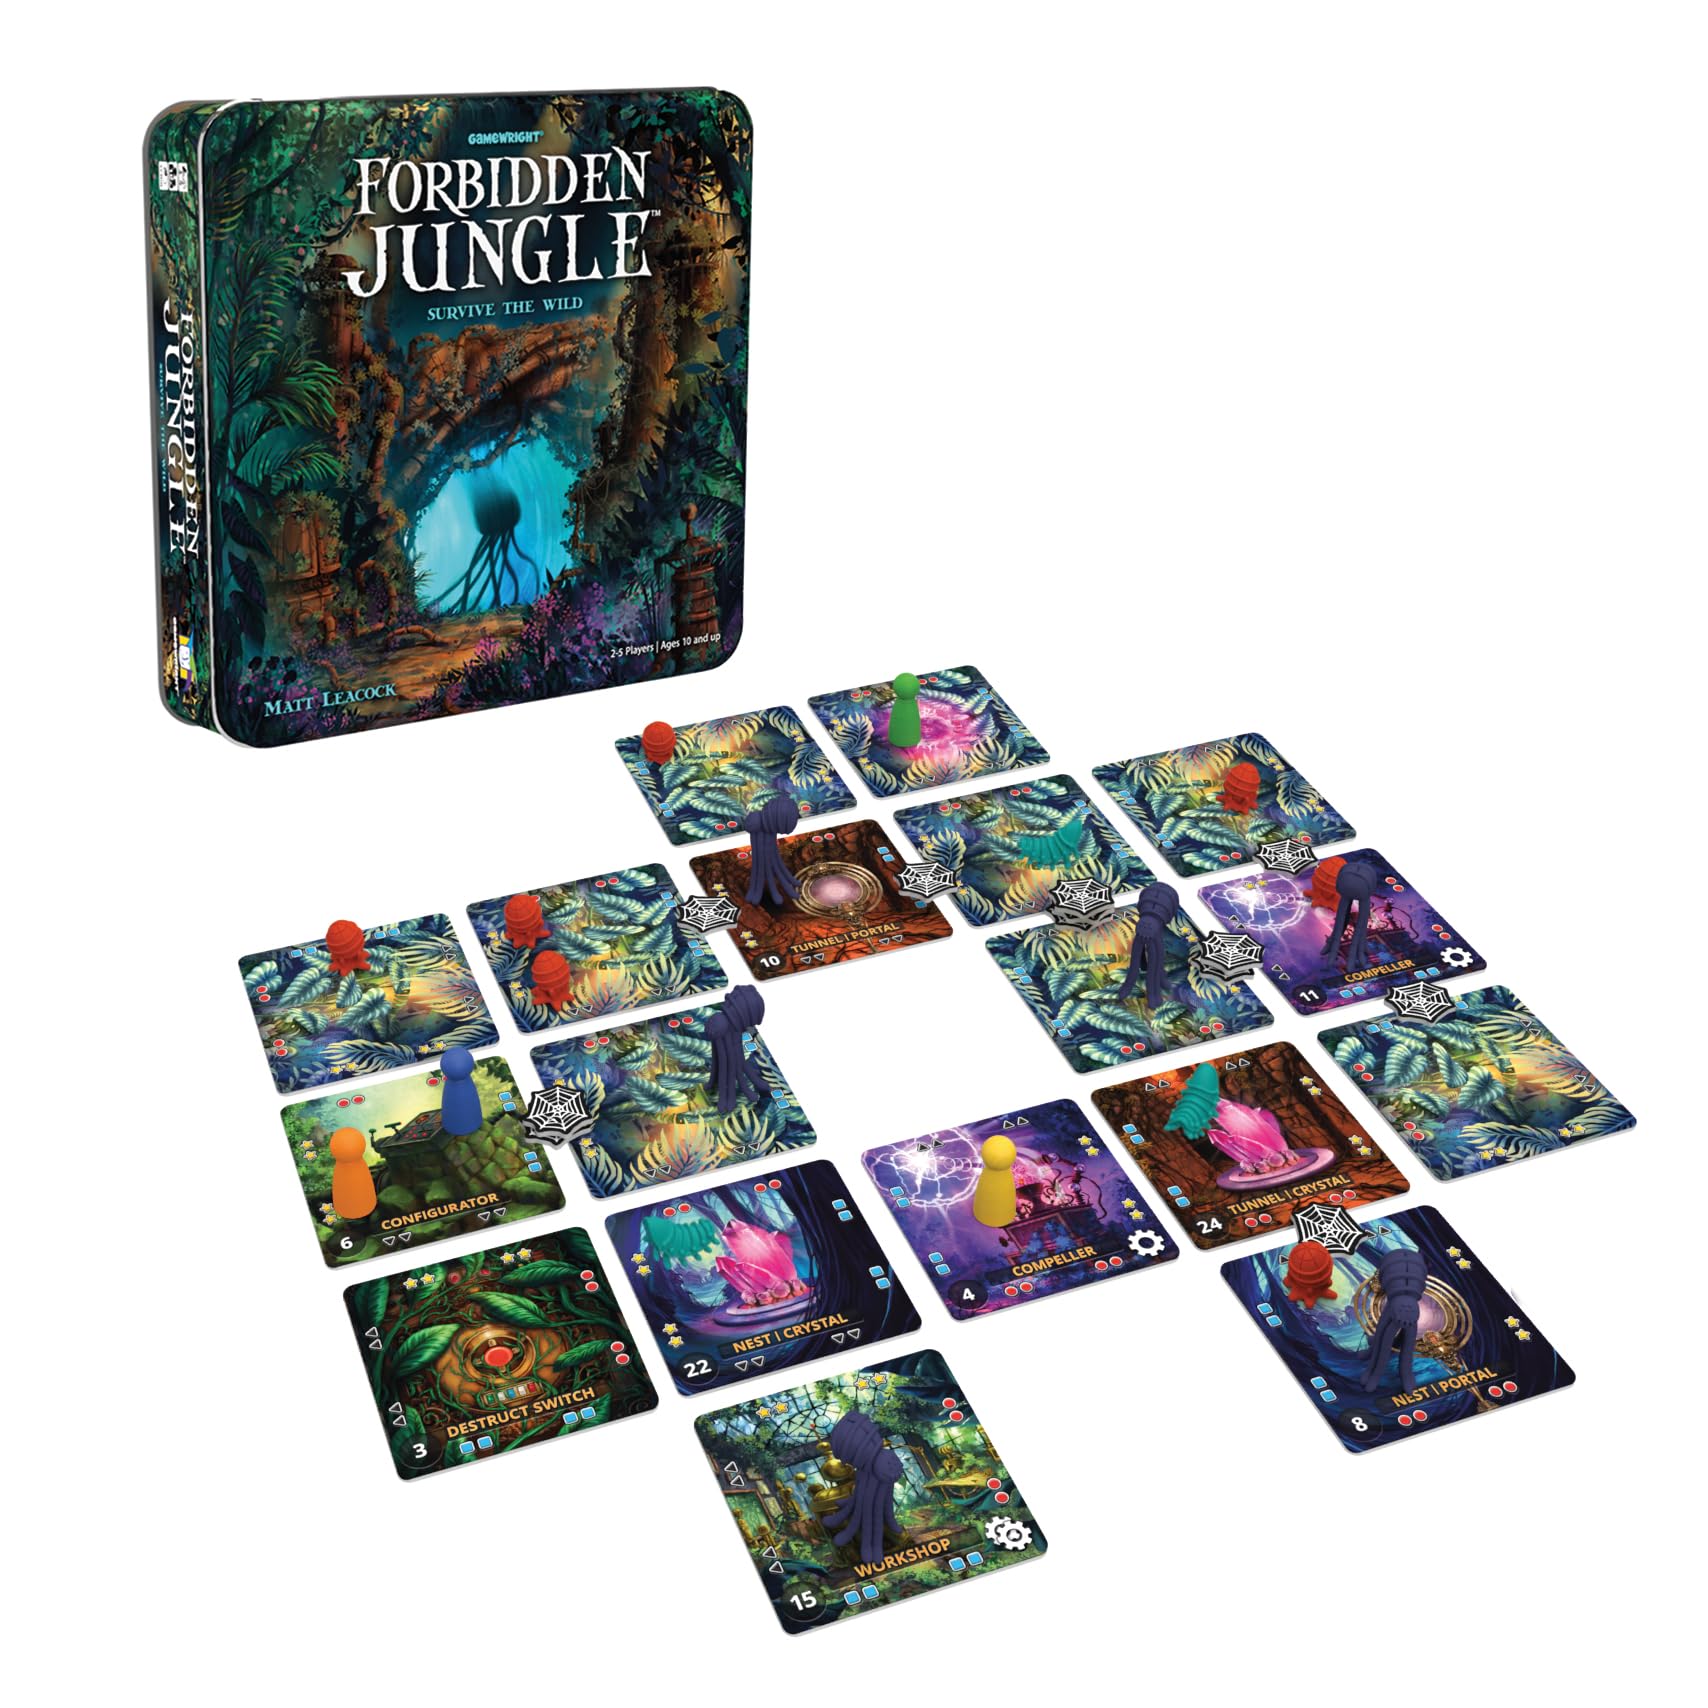 Gamewright - Forbidden Jungle - The Cooperative Strategy Survival Jungle Board Game - Ages 10 and up - 2-4 Players - Perfect for Family Game Night!